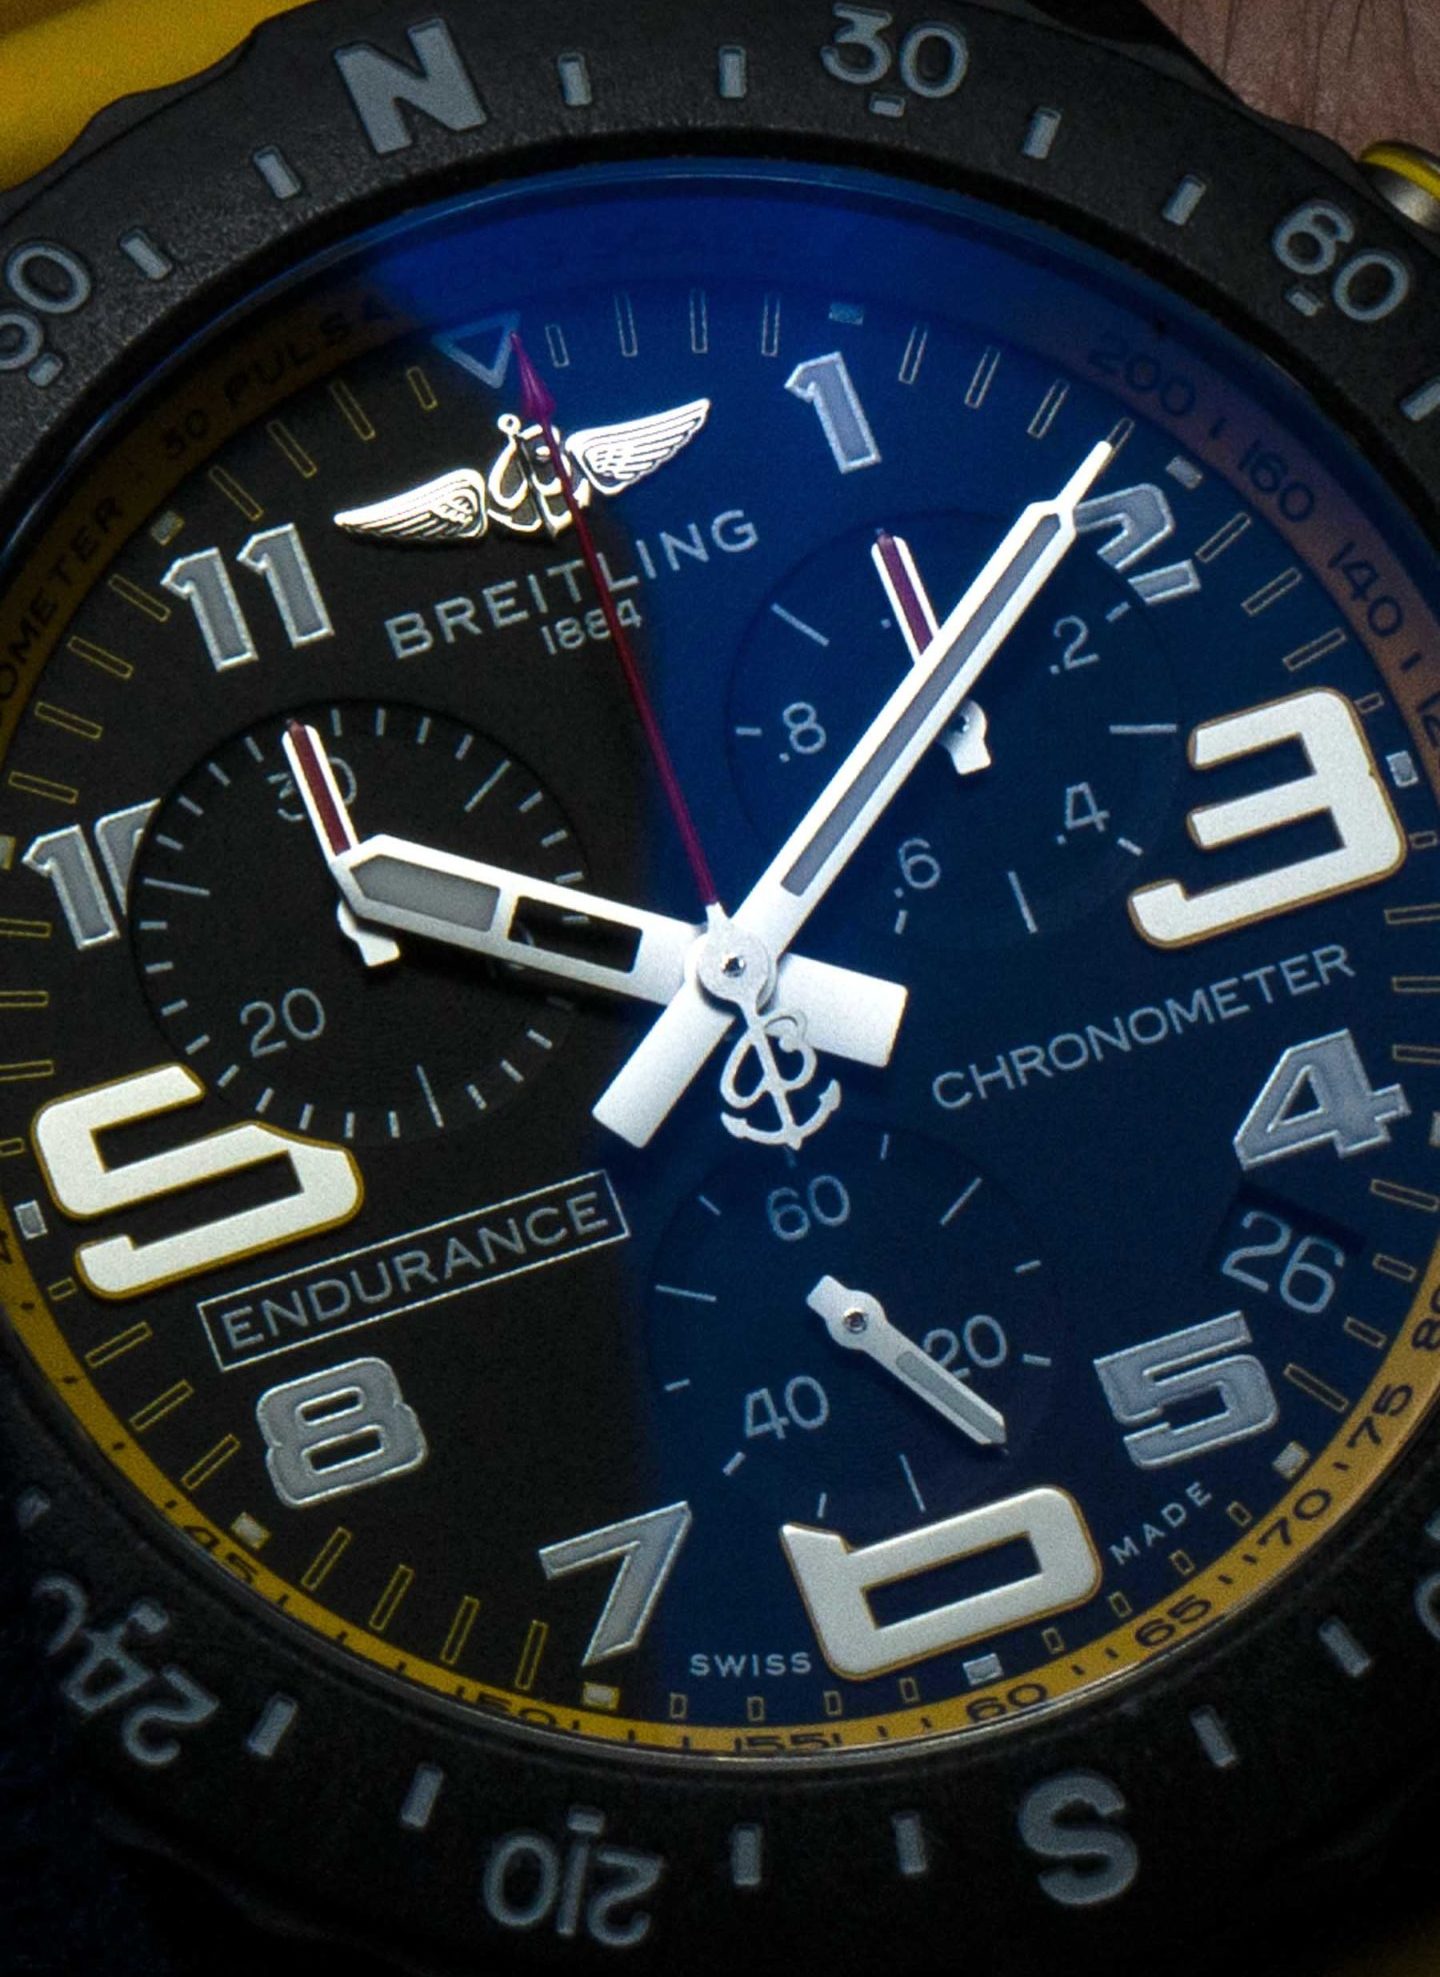 Det ingeniør Ny ankomst Hands-On With The Breitling Endurance Pro Watch For Athletes | aBlogtoWatch